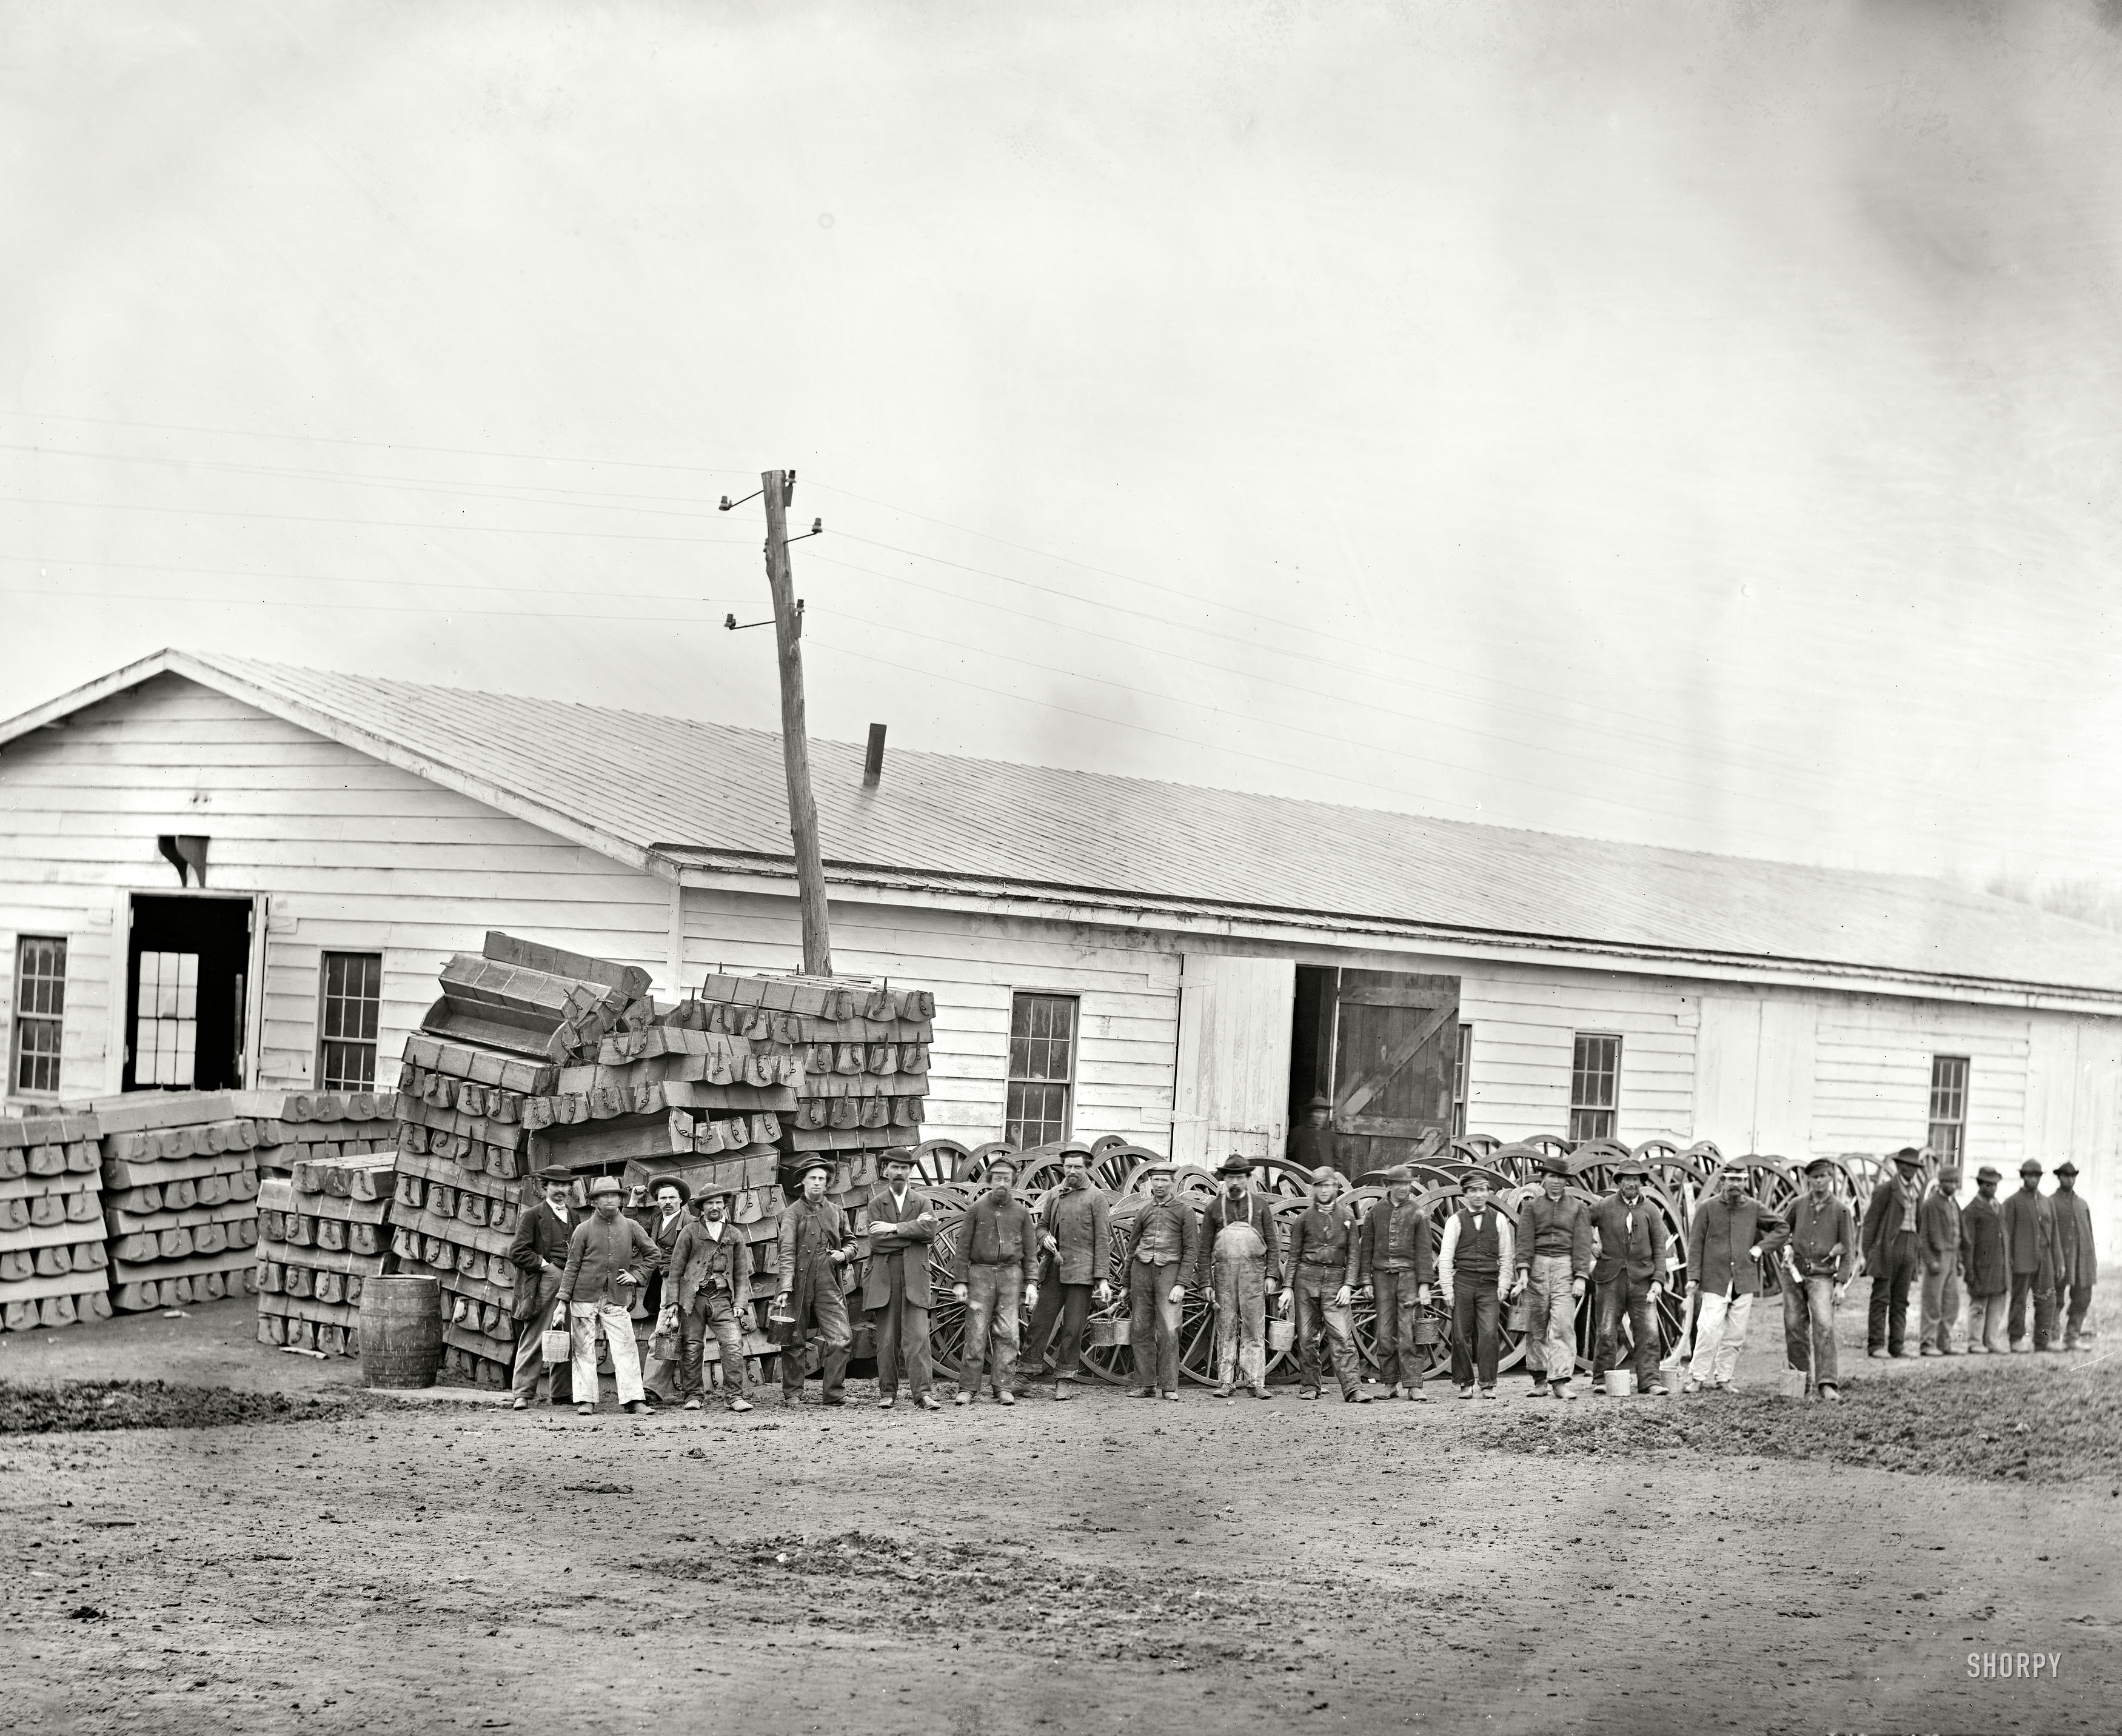 April 1865. "District of Columbia. Government repair shops. Paint Shop." Another motley crew from the Civil War era. Wet plate glass negative. View full size.